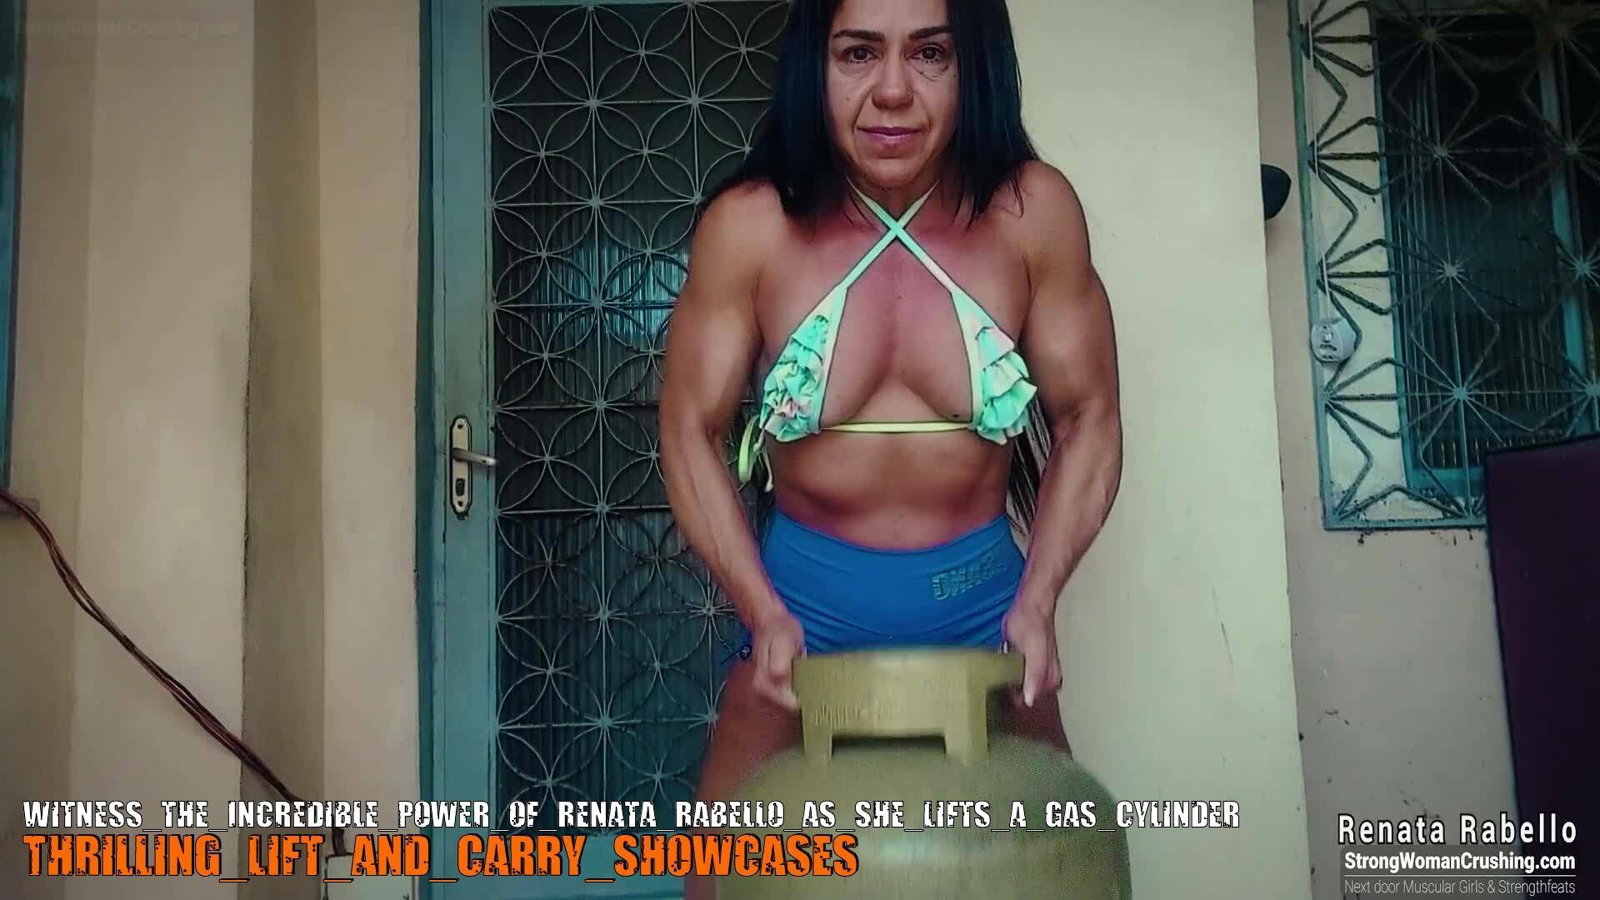 Photo by MusclegirlStrength with the username @MusclegirlStrength, who is a brand user,  September 14, 2023 at 9:11 PM and the text says '👀Want to see the 💪incredible 💪power of Renata Rabello as she lifts a gas cylinder? 🤩Get your 🆕membership now and check out the video at www.strongwomancrushing.com 📲 #RenataRabello #IncrediblePower #StrongWoman #GasCylinder #Membership'